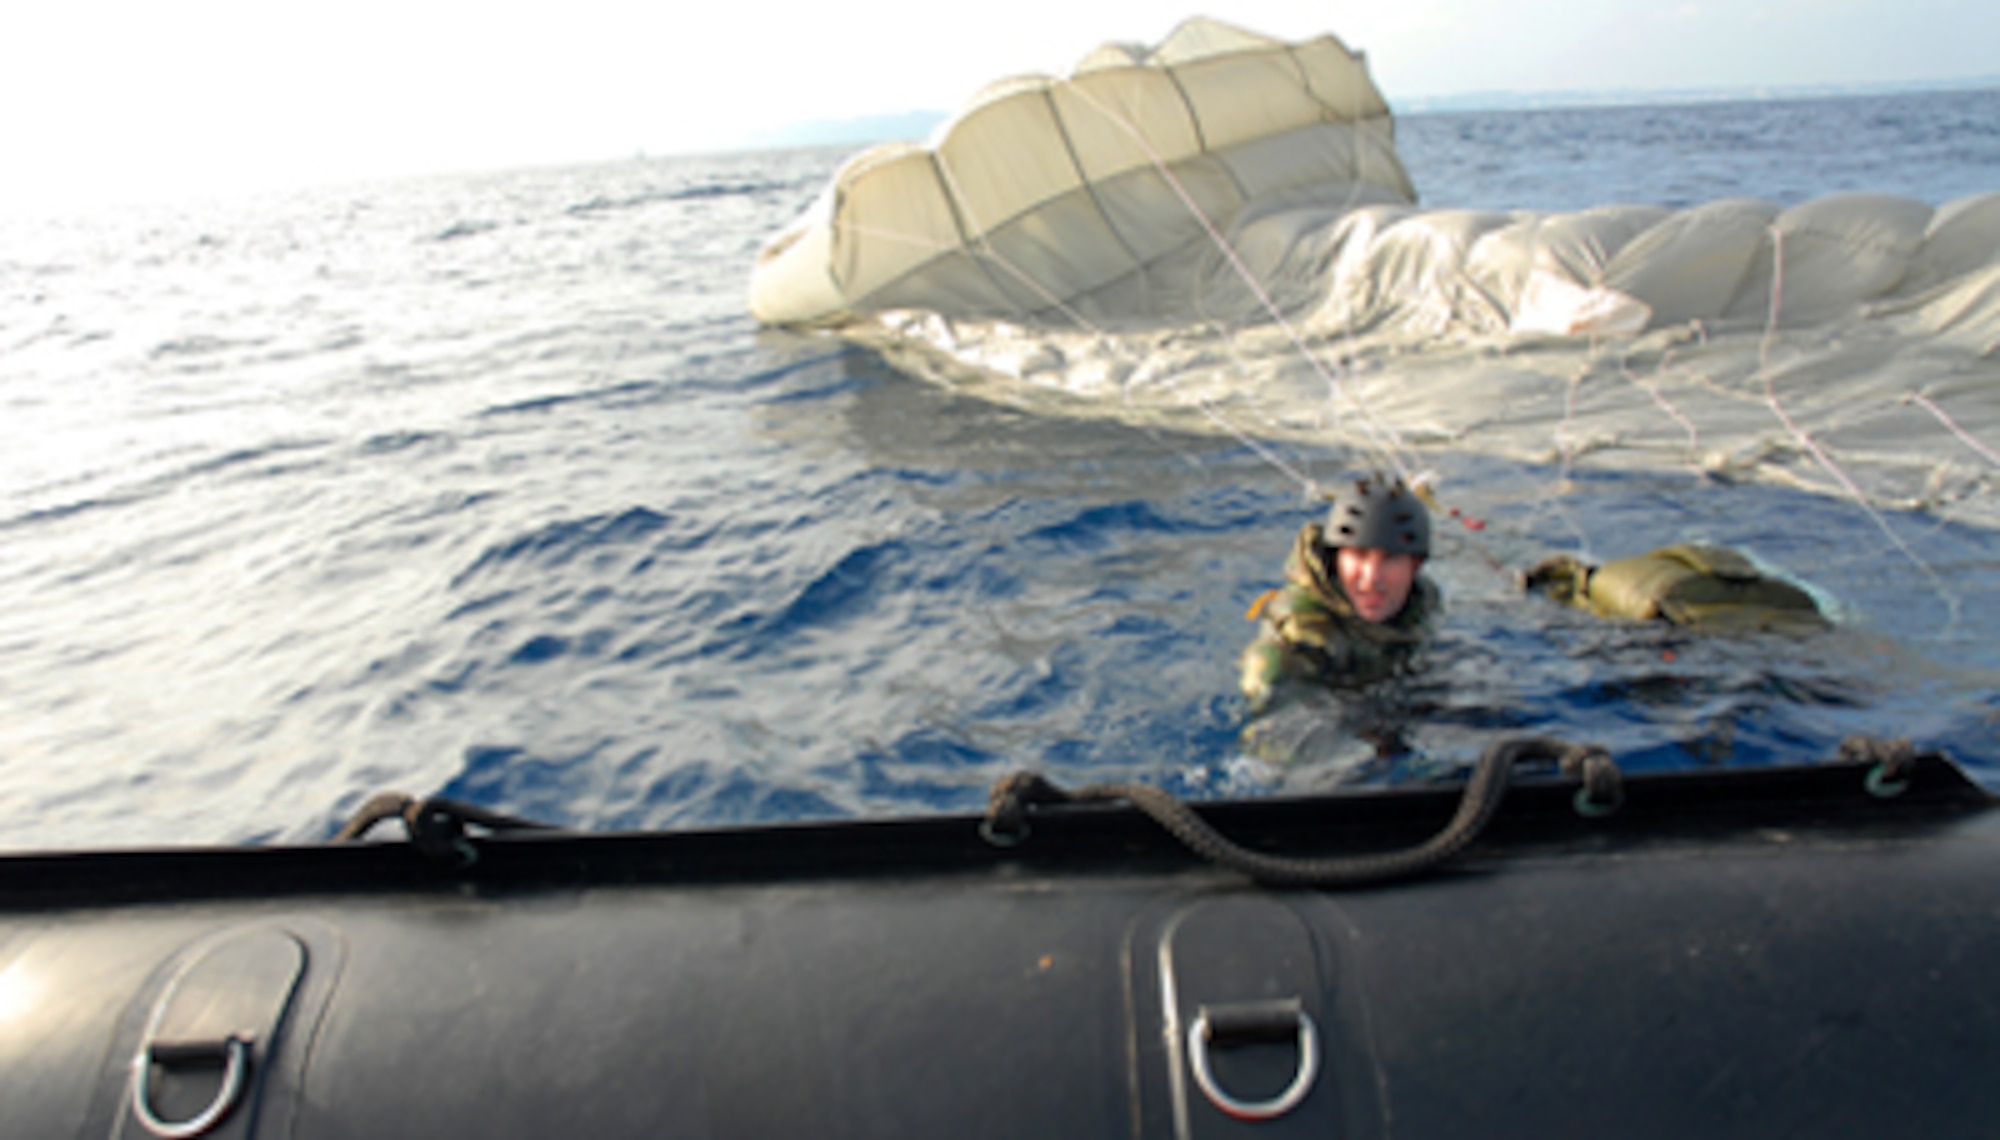 KADENA AIR BASE, Japan --Captain J. Harman from the 31st Rescue Squadron at Kadena Air Base, swims to the edge of a F470 Zodiac boat after jumping into the waters of Okinawa, Japan during a weekly training exercise on January 16, at the White Beach Naval facility.  Pararescuemen participate in their weekly proficiency jump which keeps members current in the proper procedures of rescue and keeps them mission ready.  (U.S. Air Force photo by A1C Kelly Timney) 